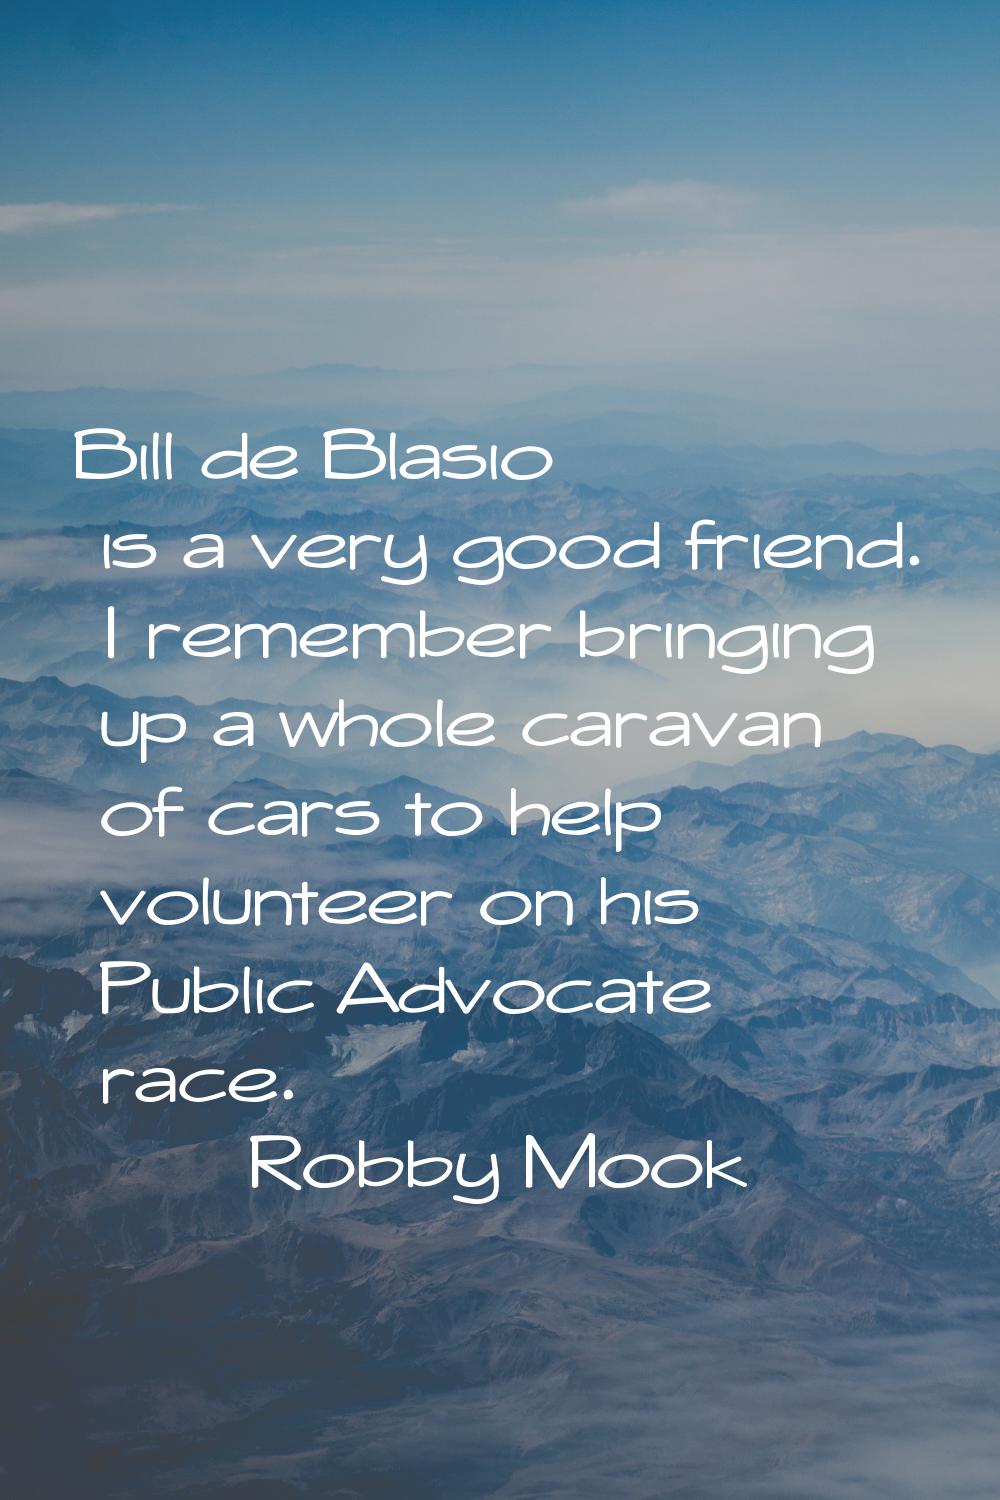 Bill de Blasio is a very good friend. I remember bringing up a whole caravan of cars to help volunt